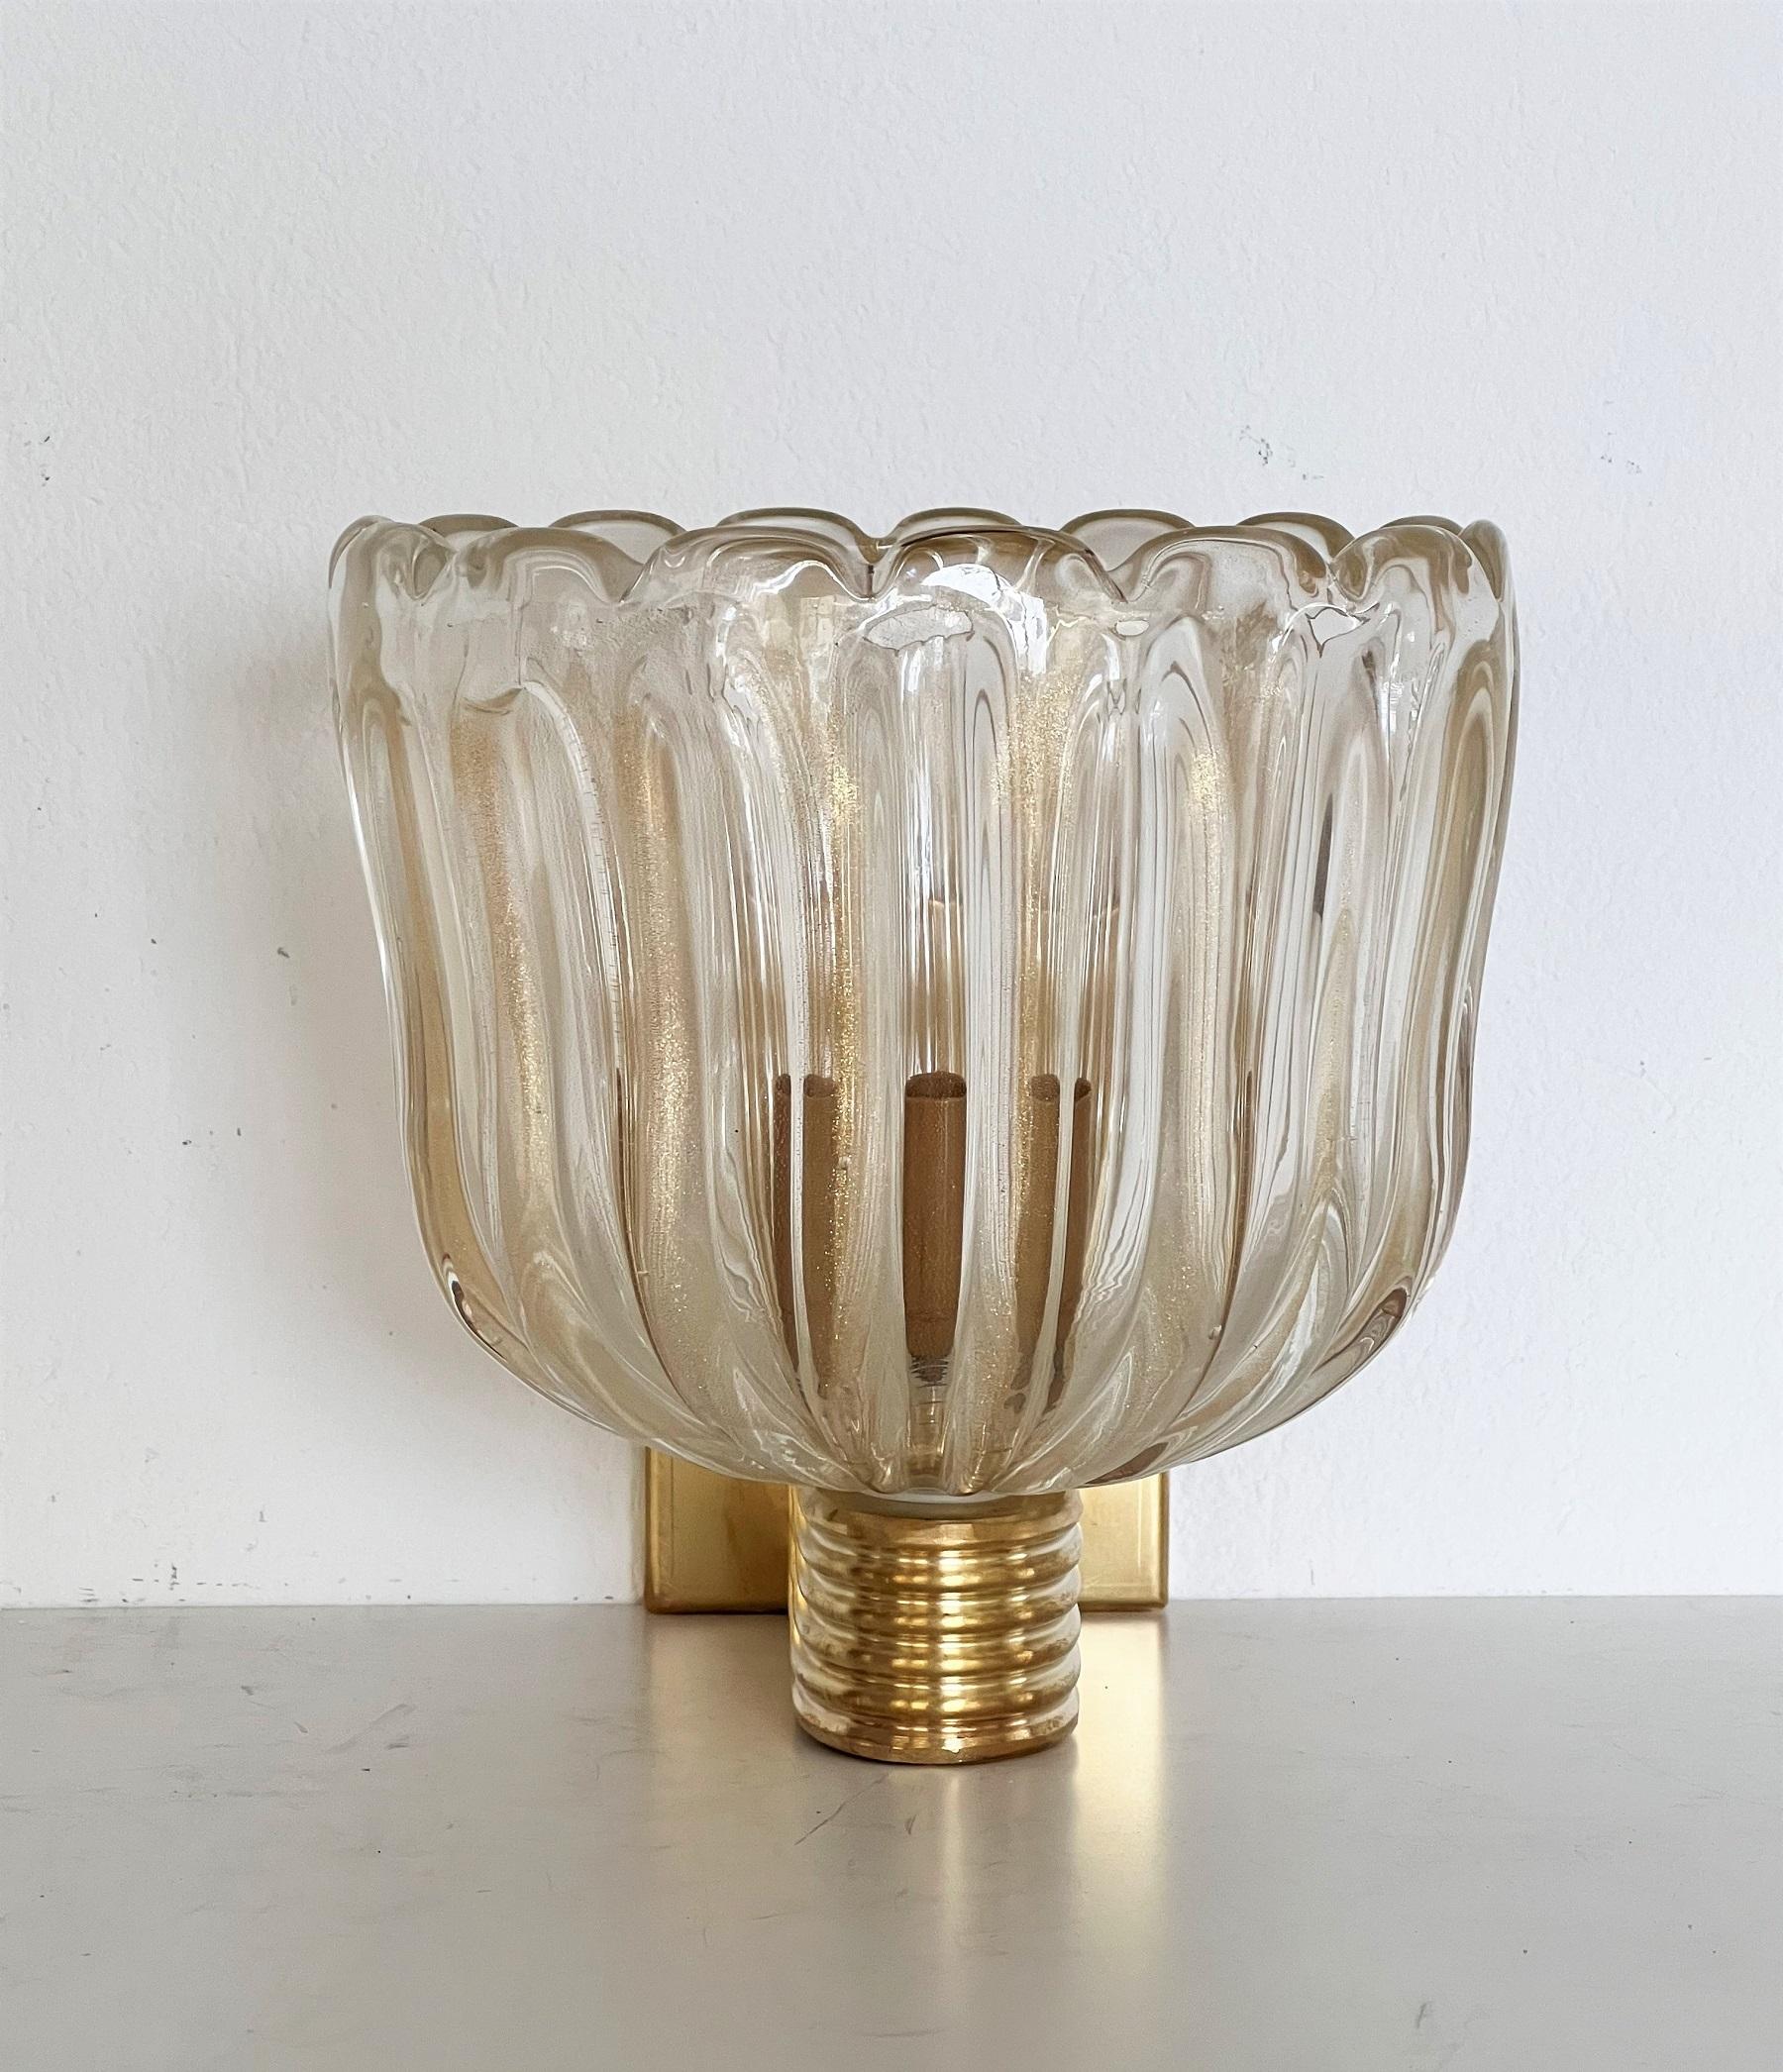 Hand-Crafted Italian Brass and Murano Glass Wall Light or Sconce in Art Deco Style, 1990s